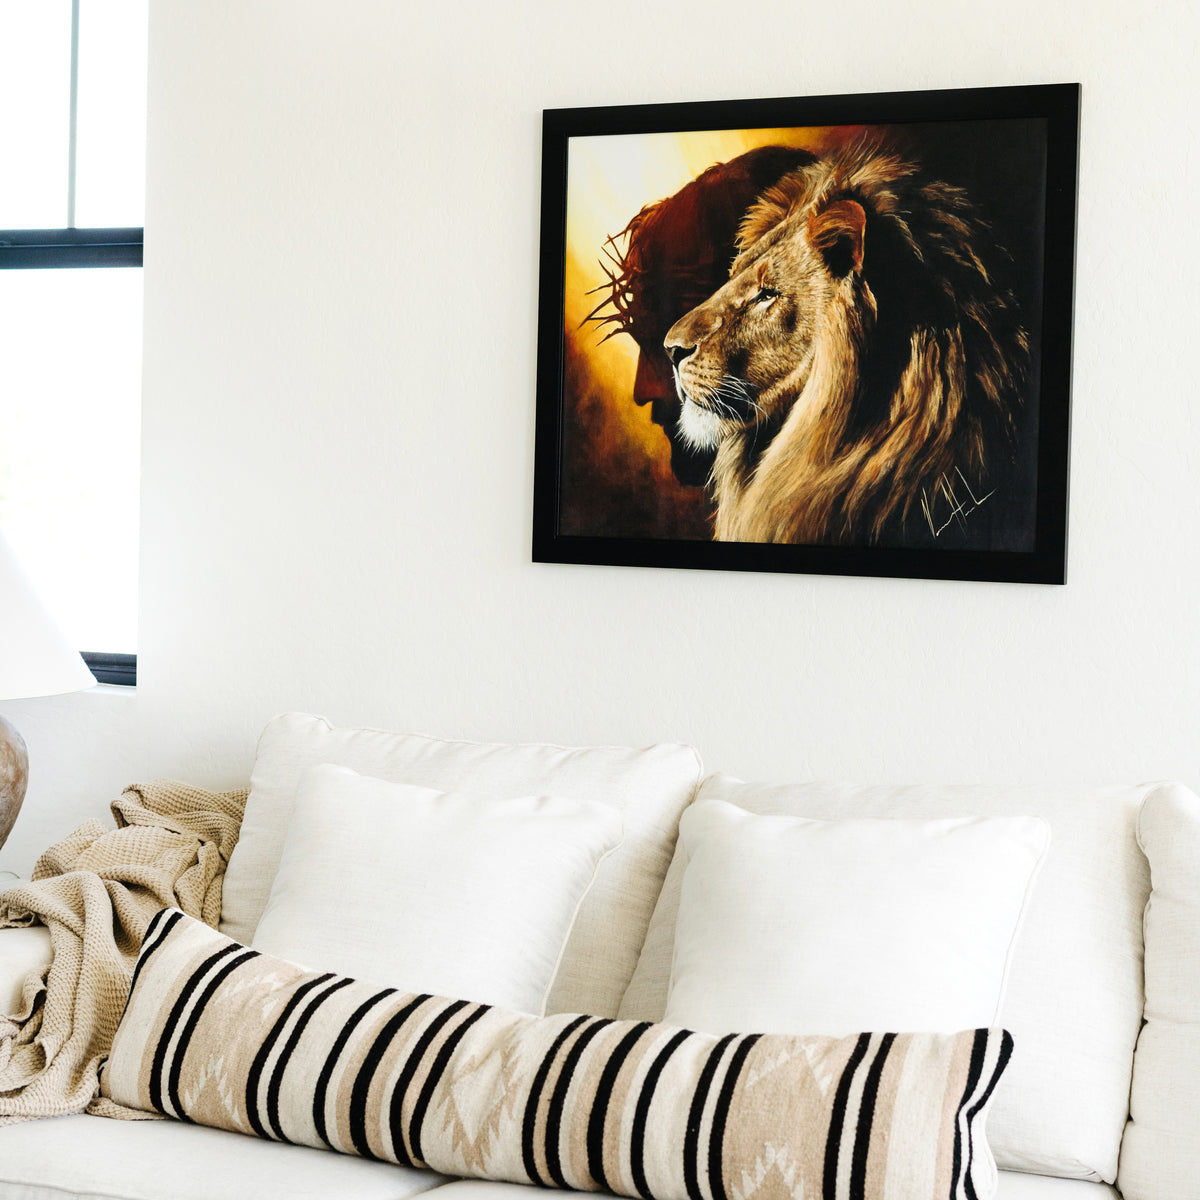 The Lion of Judah Painting haning on a wall above a couch